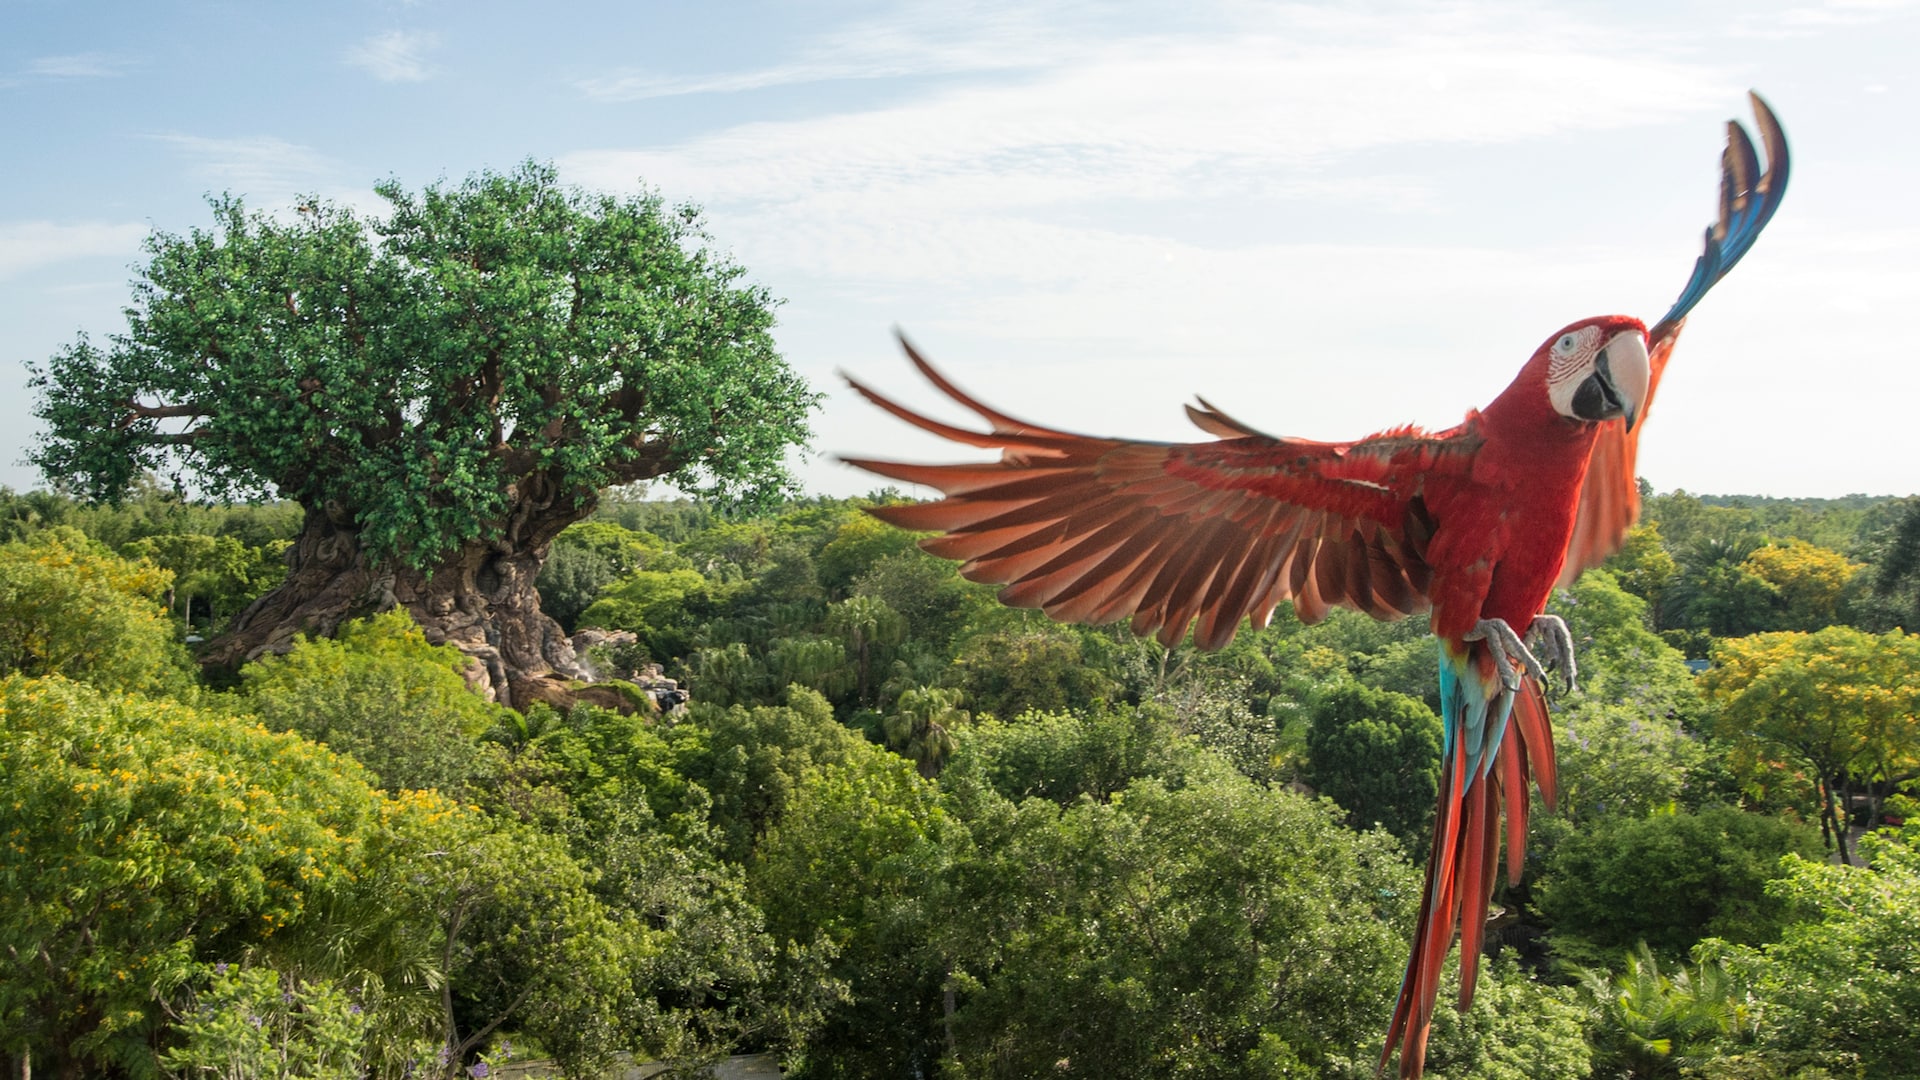 A macaw slows to land and, in the background, the Tree of Life